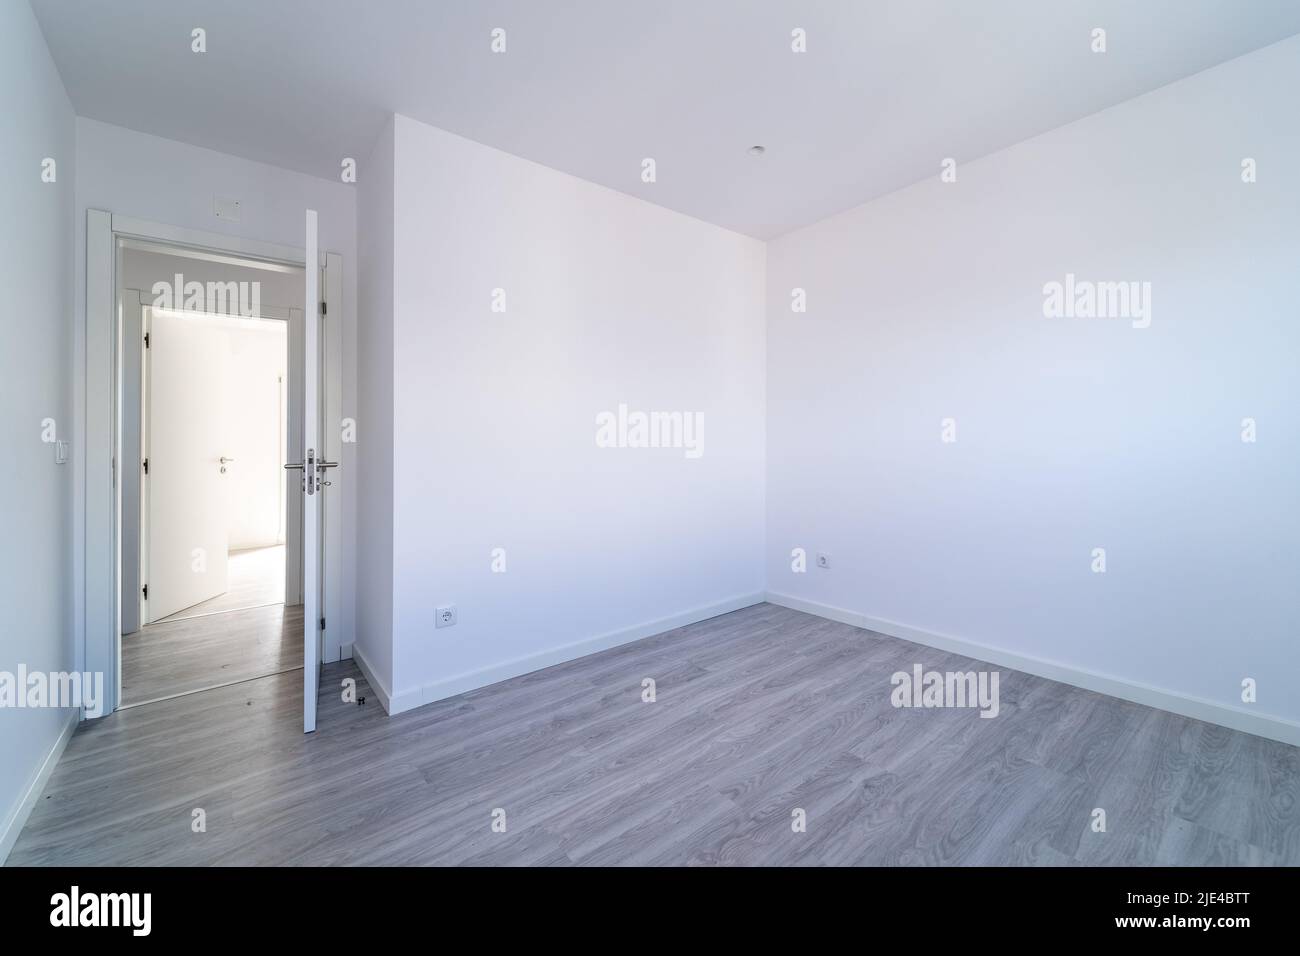 Empty room with gray wooden floating, laminate flooring. House interior, wide bedroom or living room space. New home, apartment or house. Wood floor. Stock Photo